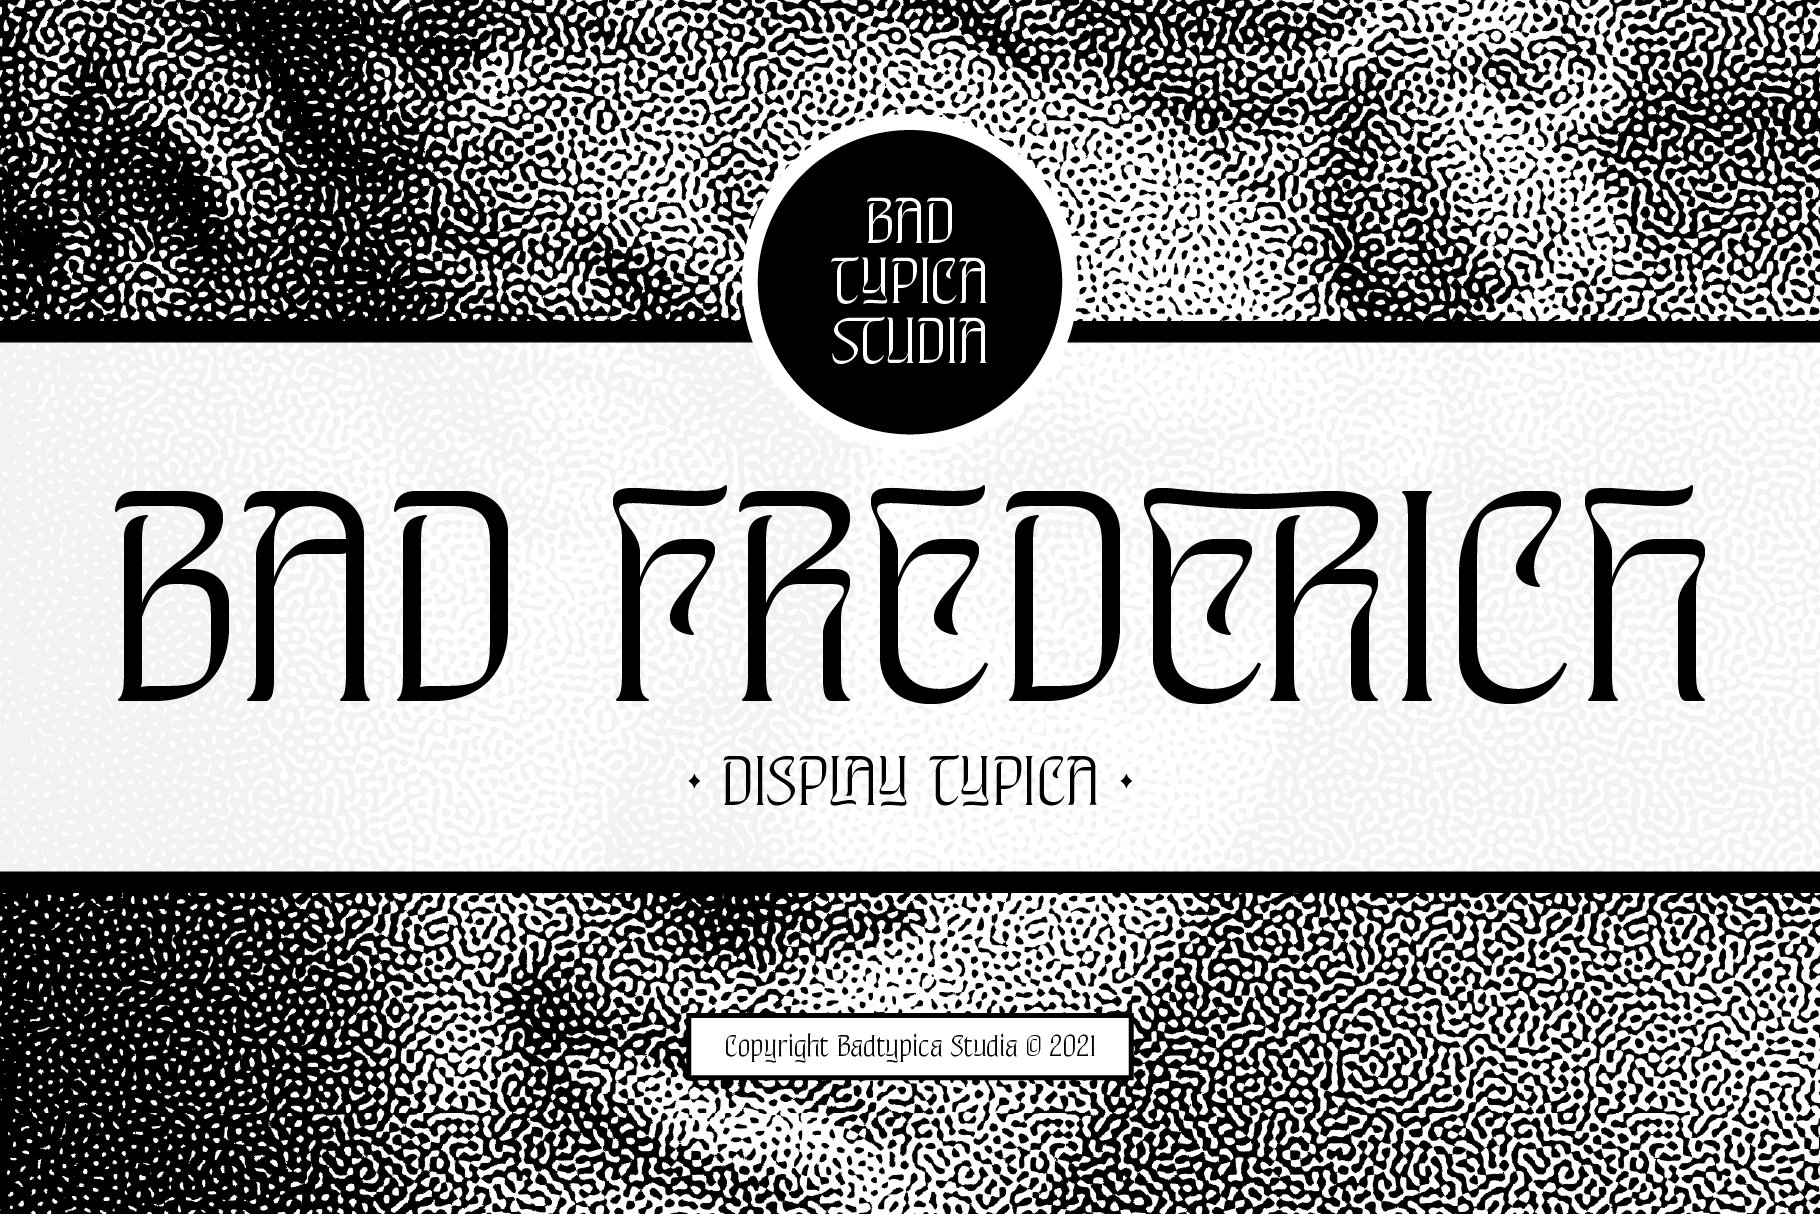 Bad Frederich cover image.